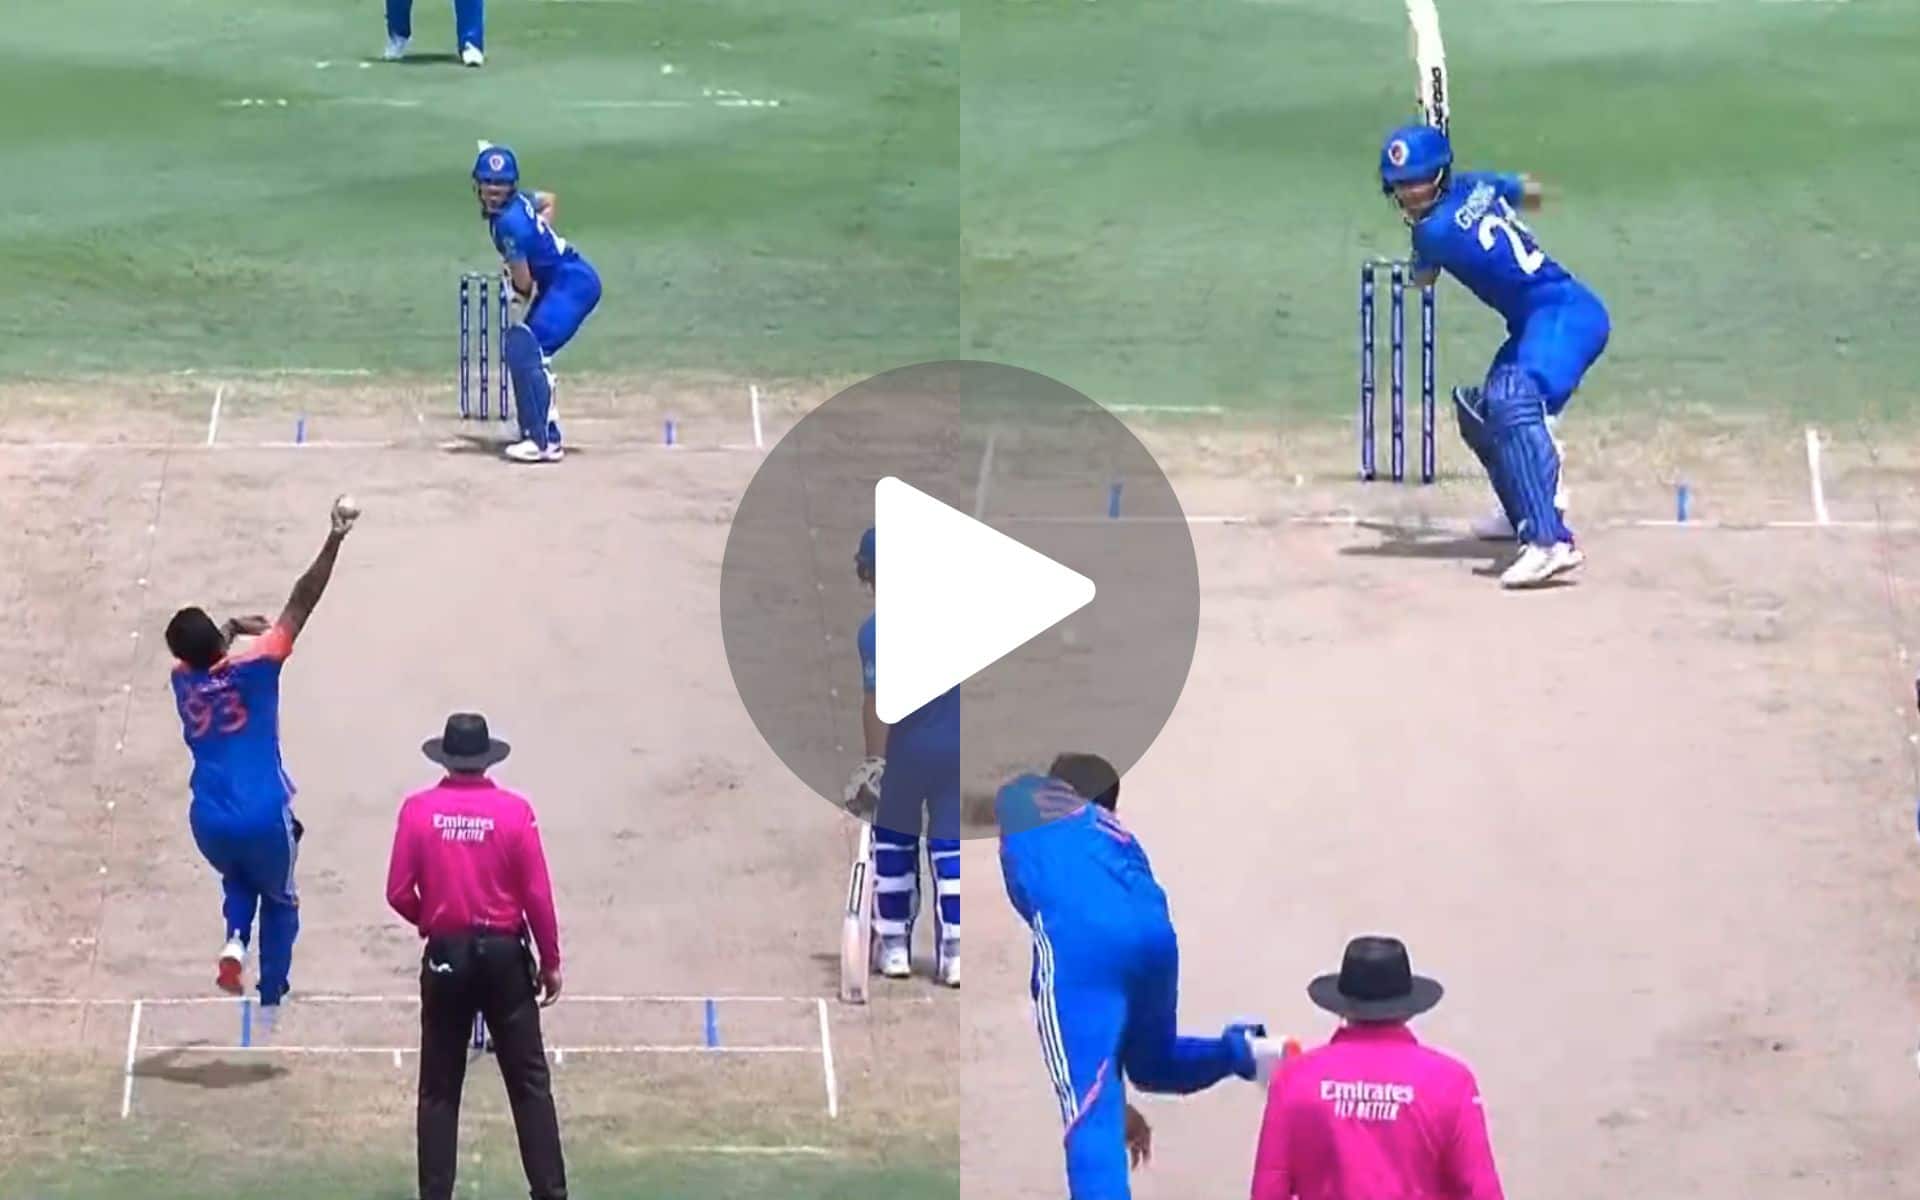 [Watch] Gurbaz's 'Chicken Chase' Vs Bumrah Goes Horribly Wrong In IND Vs AFG